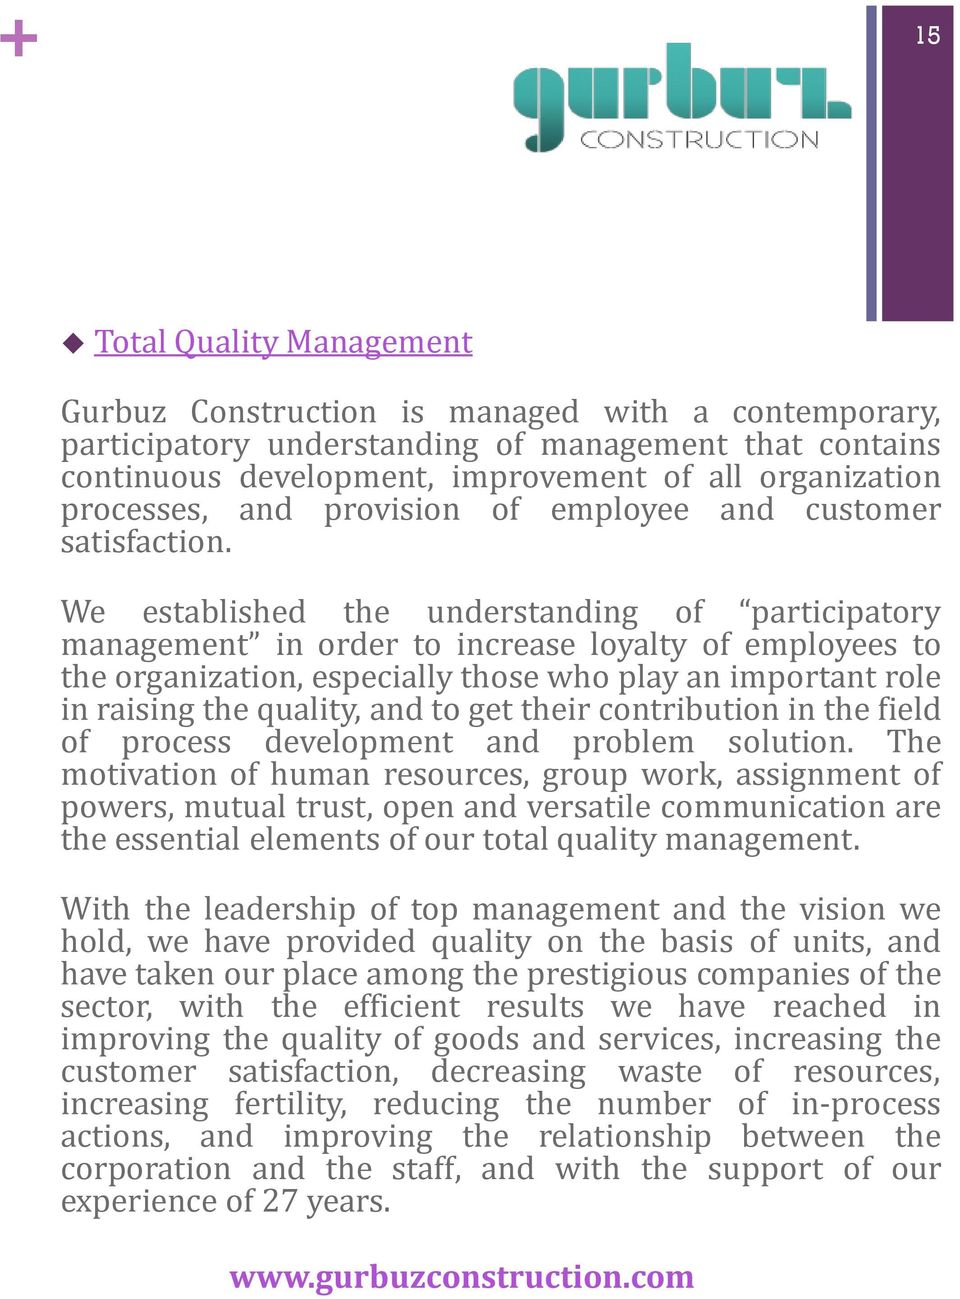 We established the understanding of participatory management in order to increase loyalty of employees to the organization, especially those who play an important role in raising the quality, and to